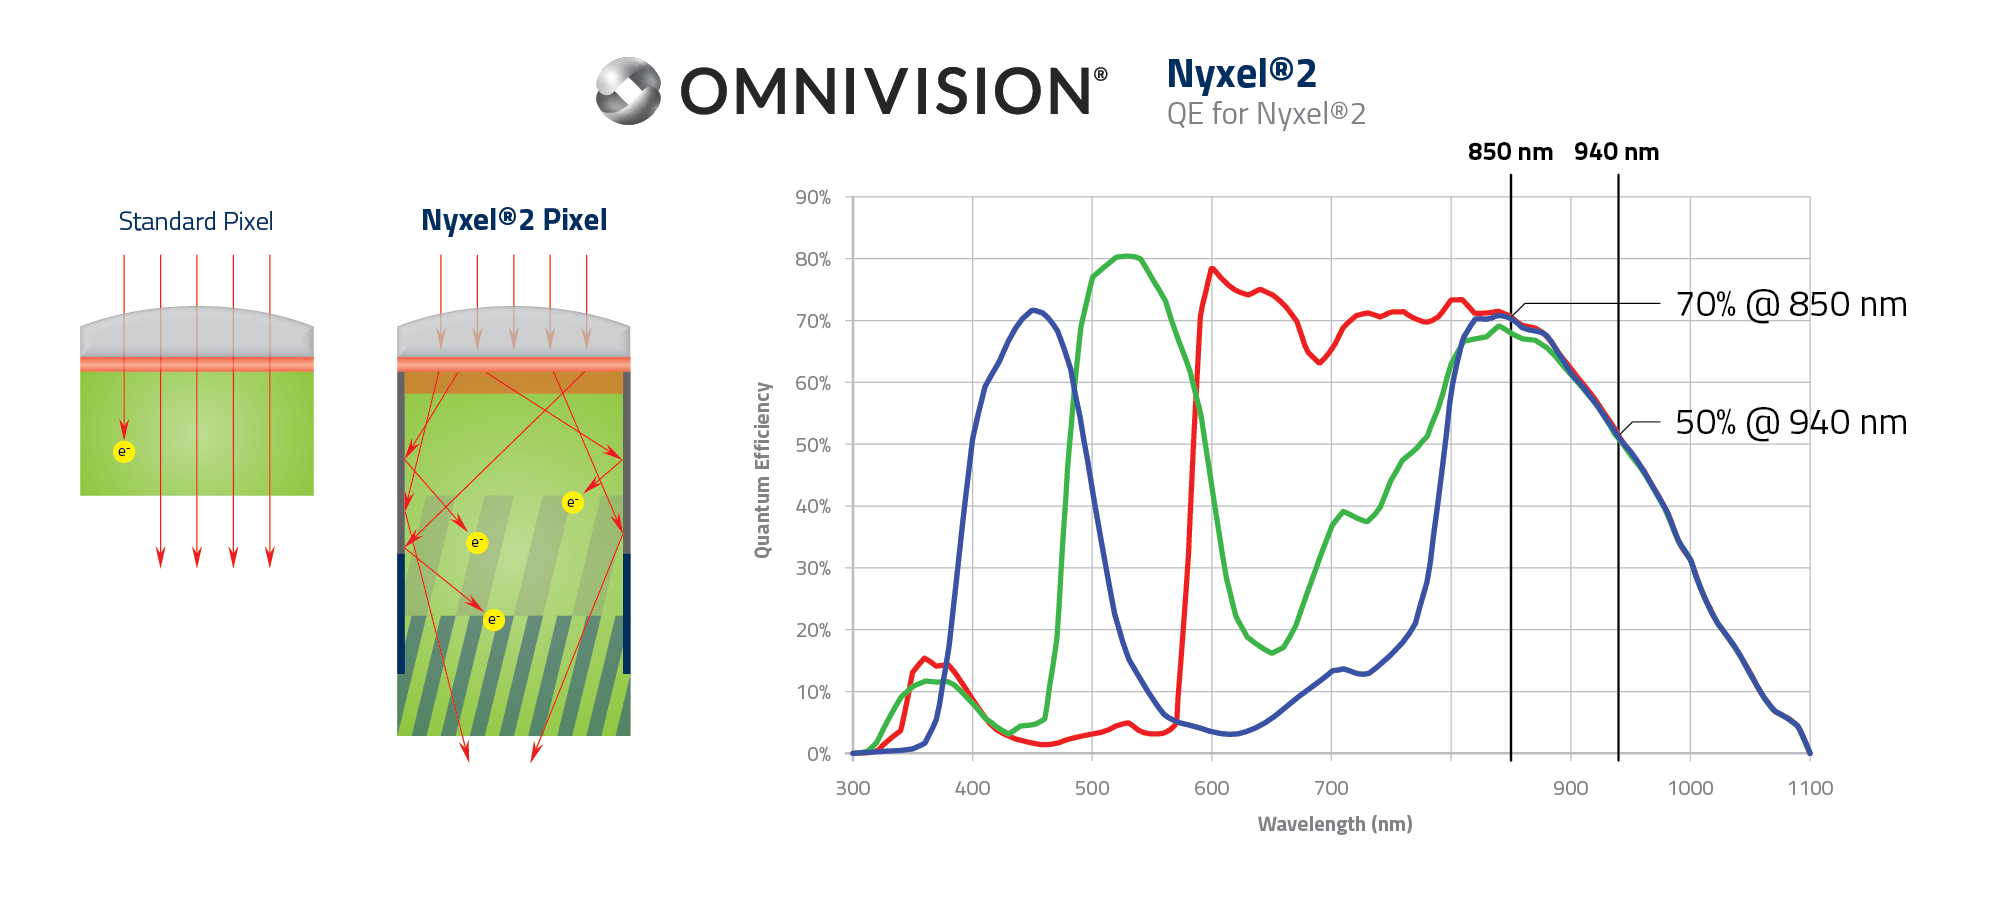 Nyxel®2 is OMNIVISION's second generation, revolutionary near-infrared (NIR) technology for image sensors that operate in low to no ambient light conditions, now providing a 25% improvement in the invisible 940nm NIR light spectrum and a 17% bump at the barely visible 850nm NIR wavelength.